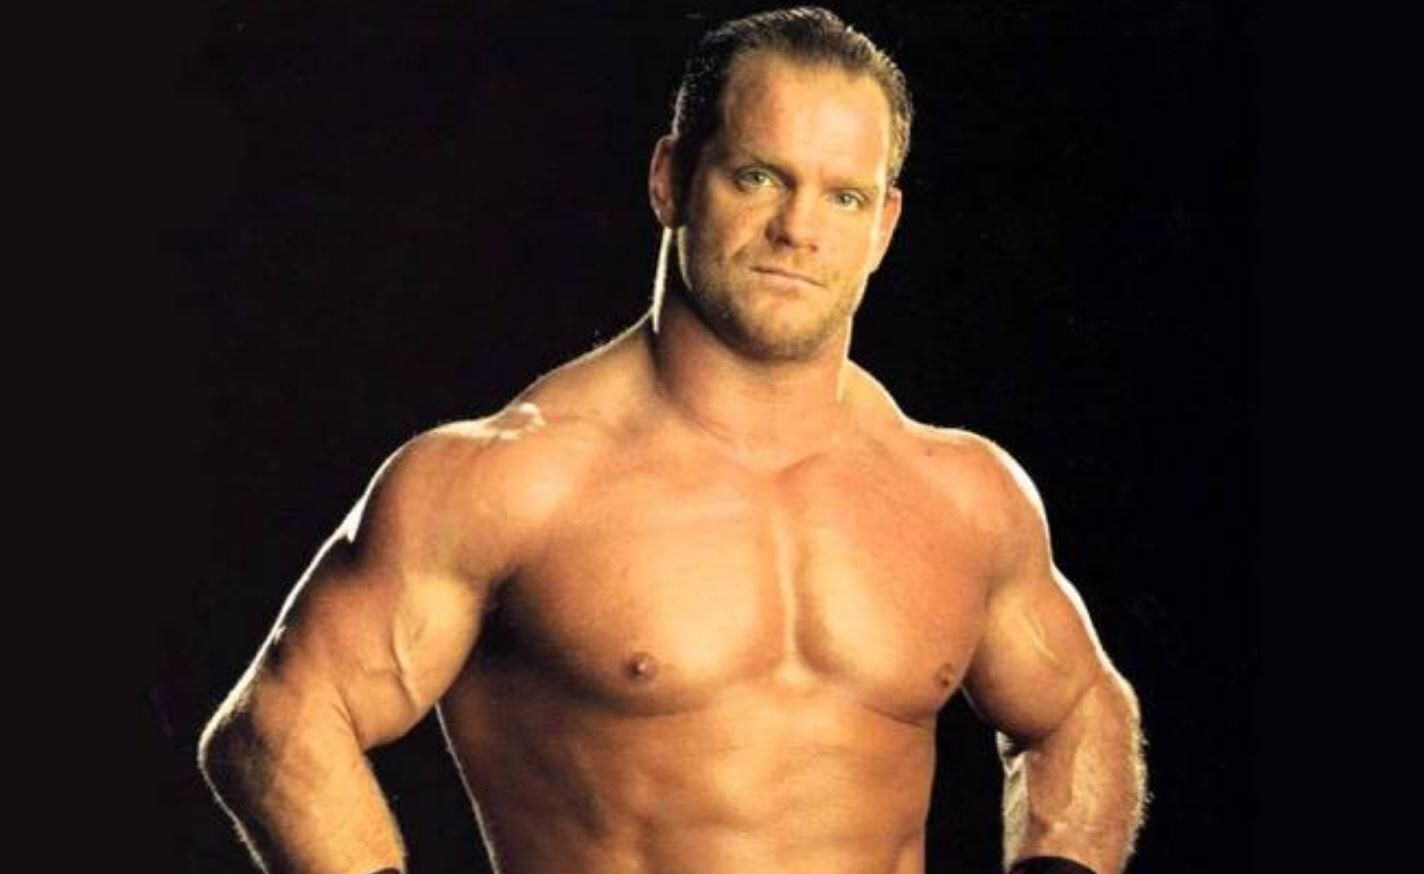 The legacy of Chris Benoit has been forever tarnished due to the heinous and gruesome murder-suicide that took place in June 2007.